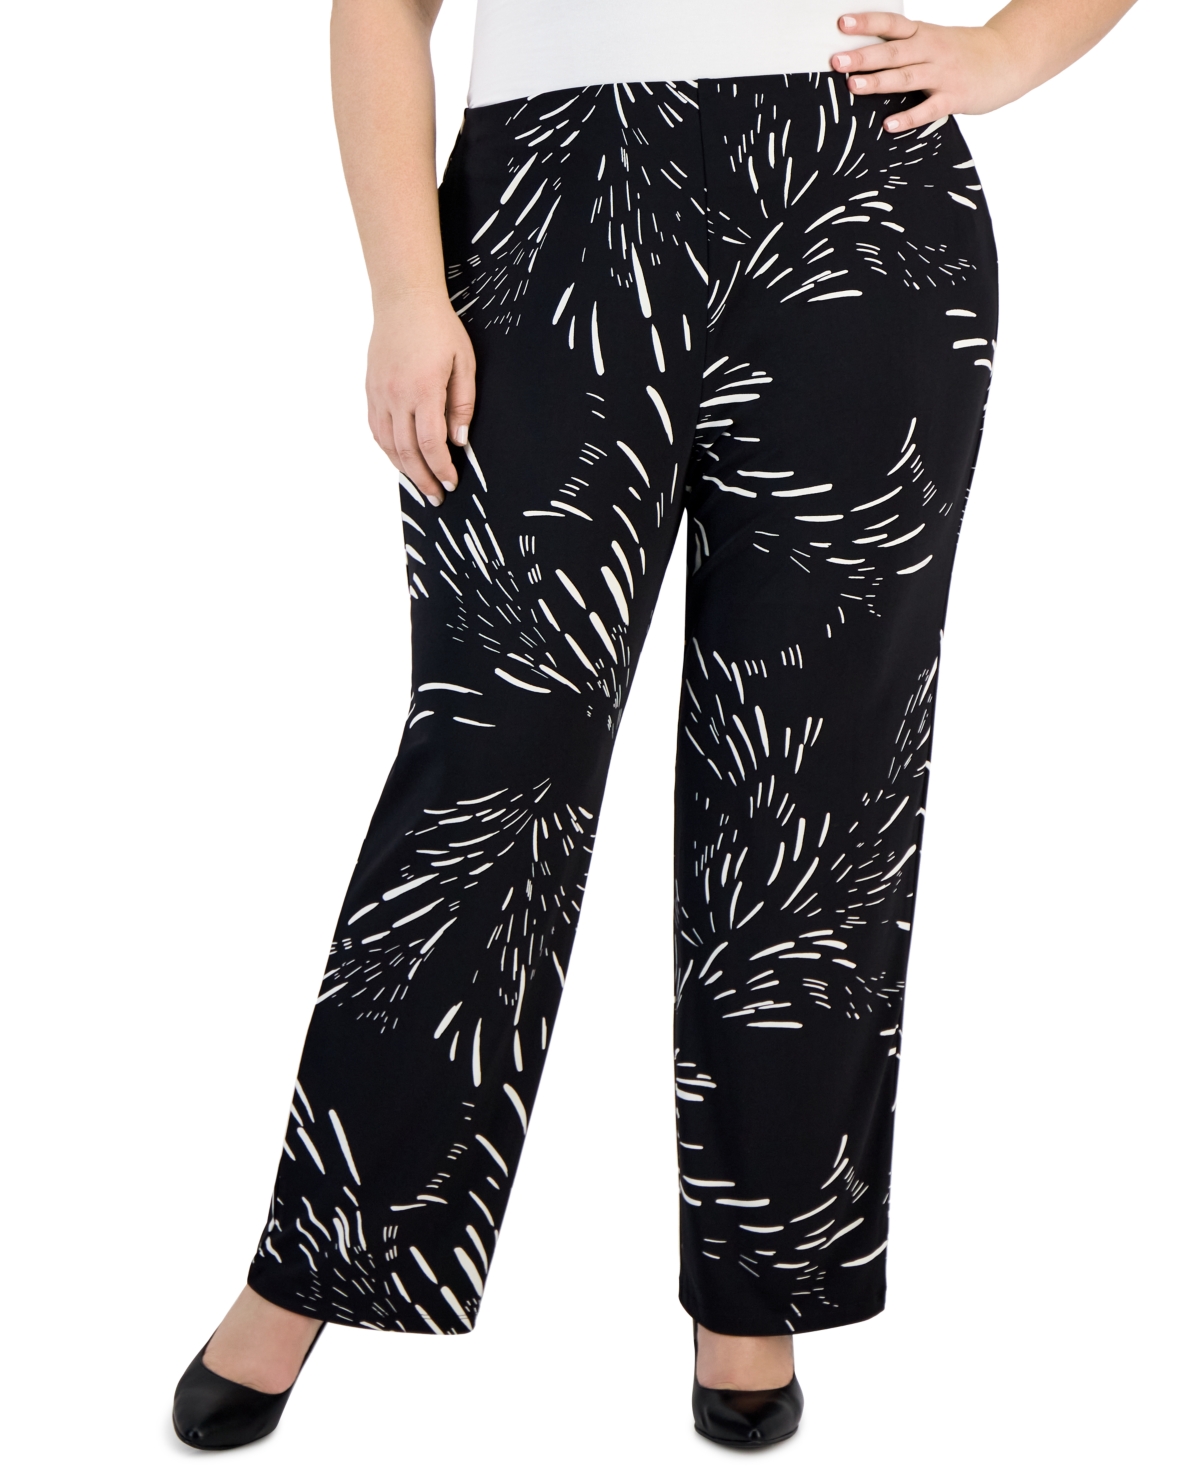 Plus Size Wide-Leg Pull-On Pants, Created for Macy's - Deep Black Combo